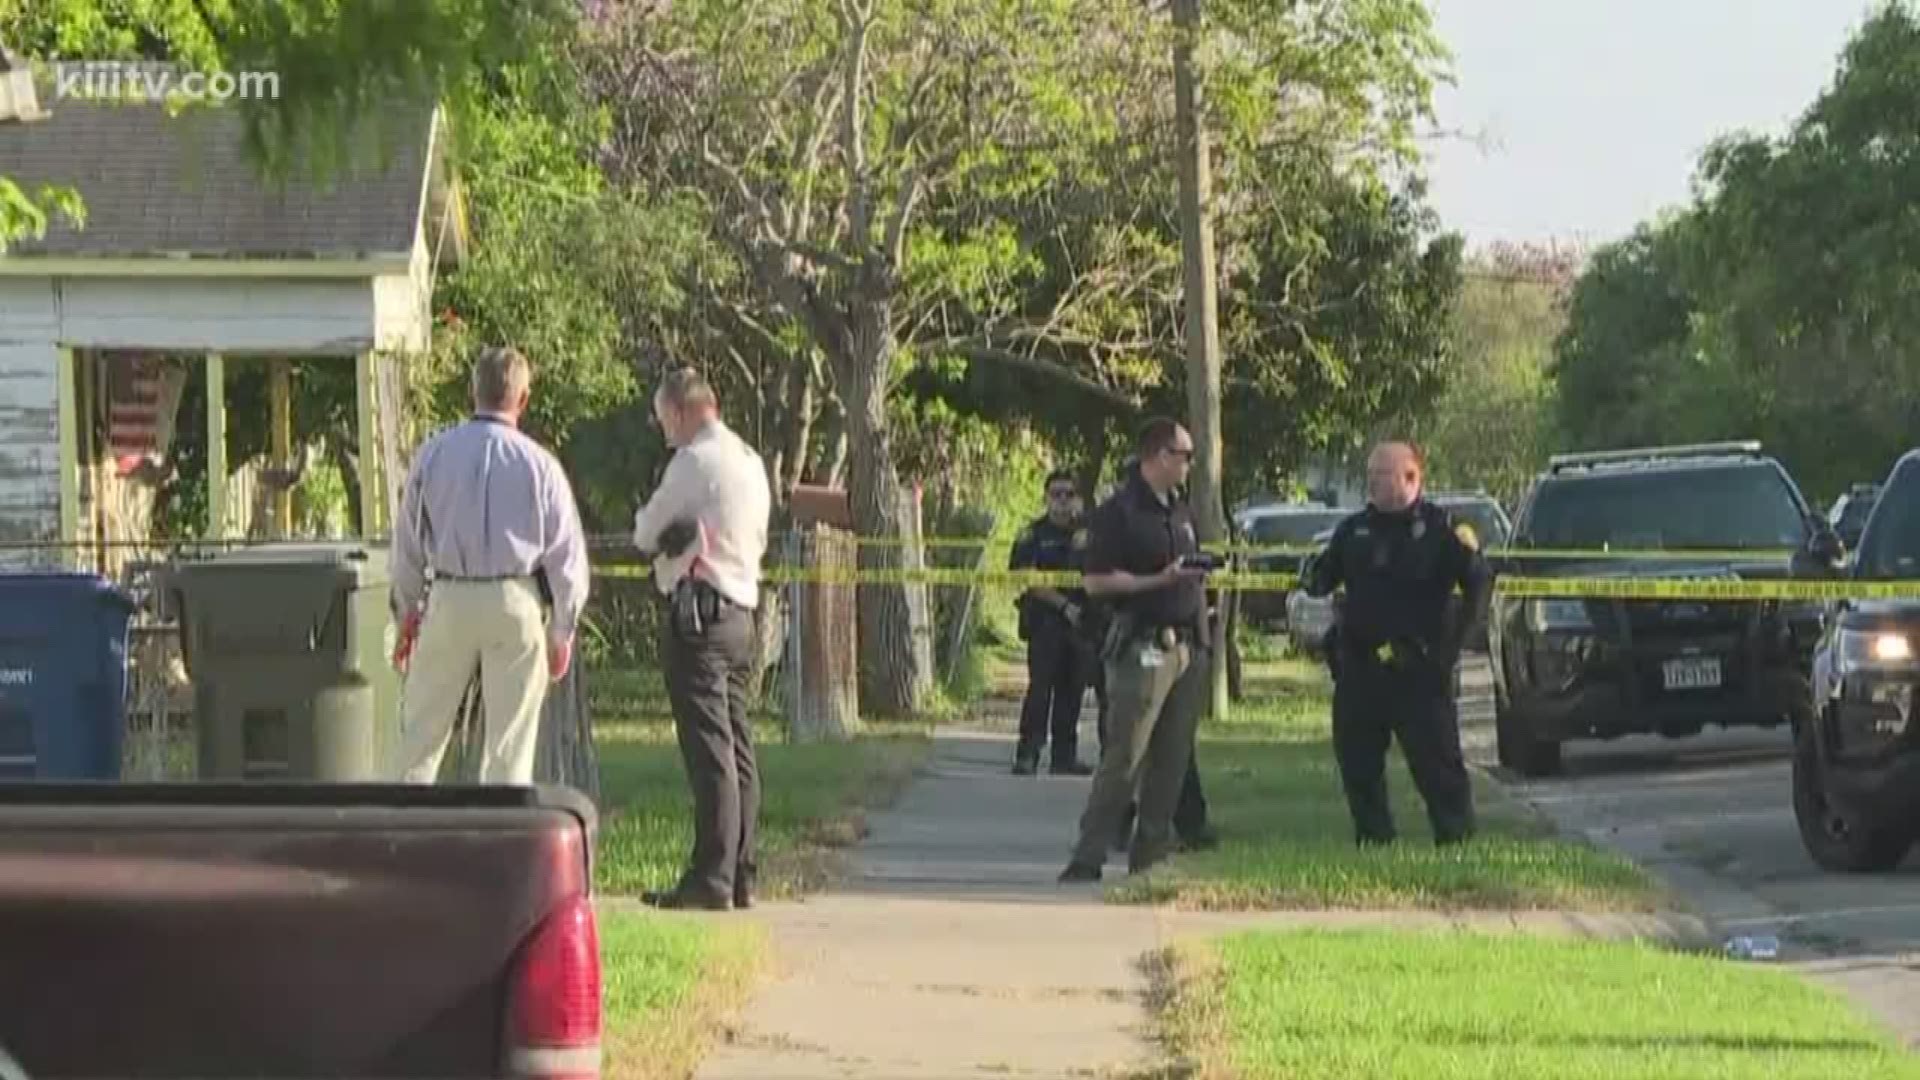 Corpus Christi police were called to the scene of an officer-involved shooting Tuesday afternoon in the city's westside.